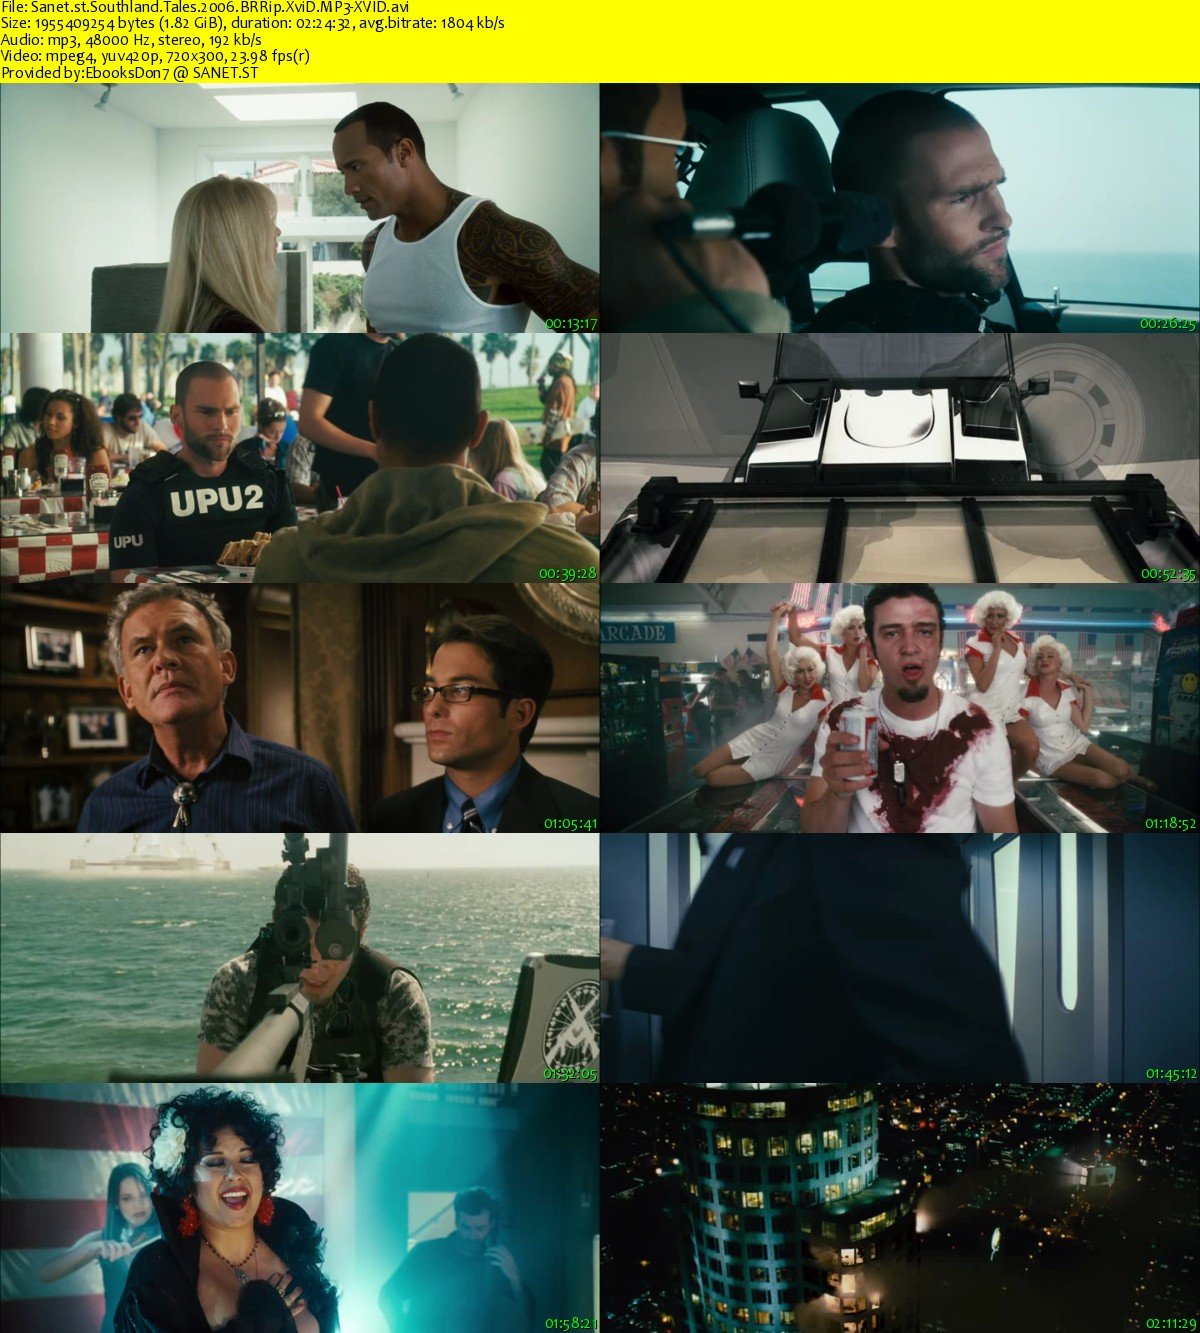 2006 Southland Tales